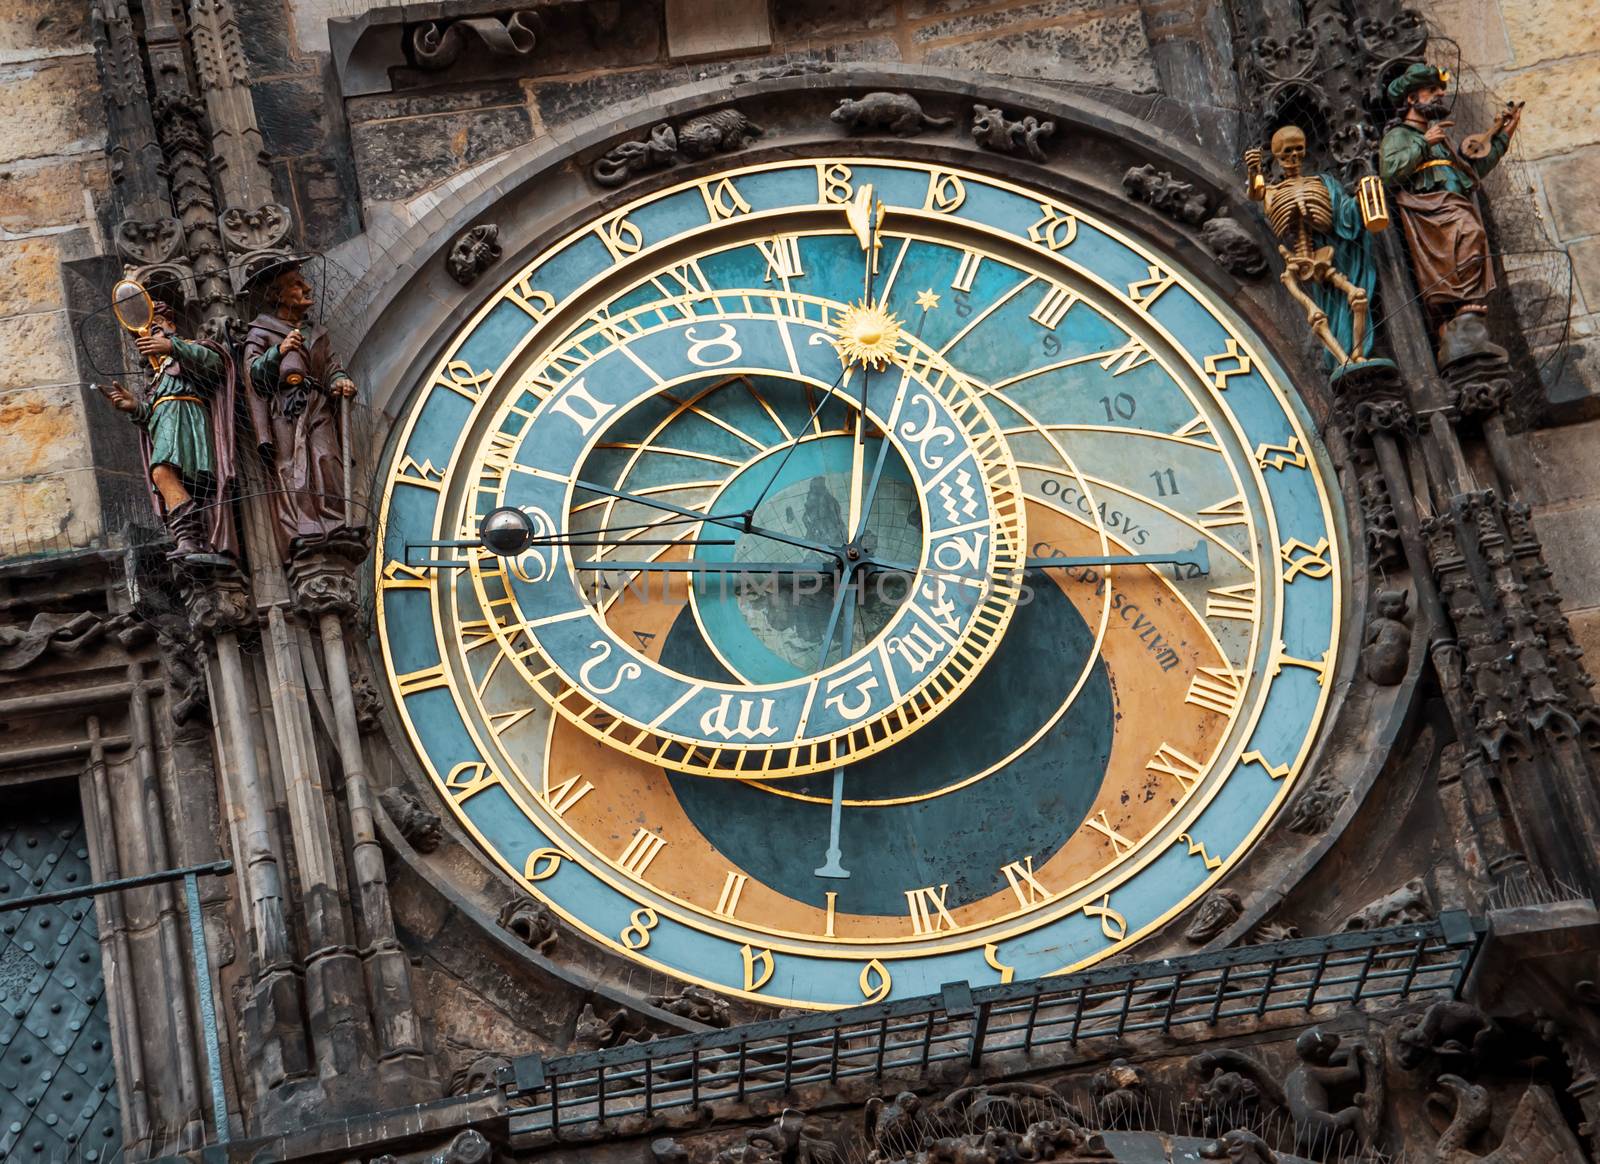 Astronomical clock in Prague by Angel_a